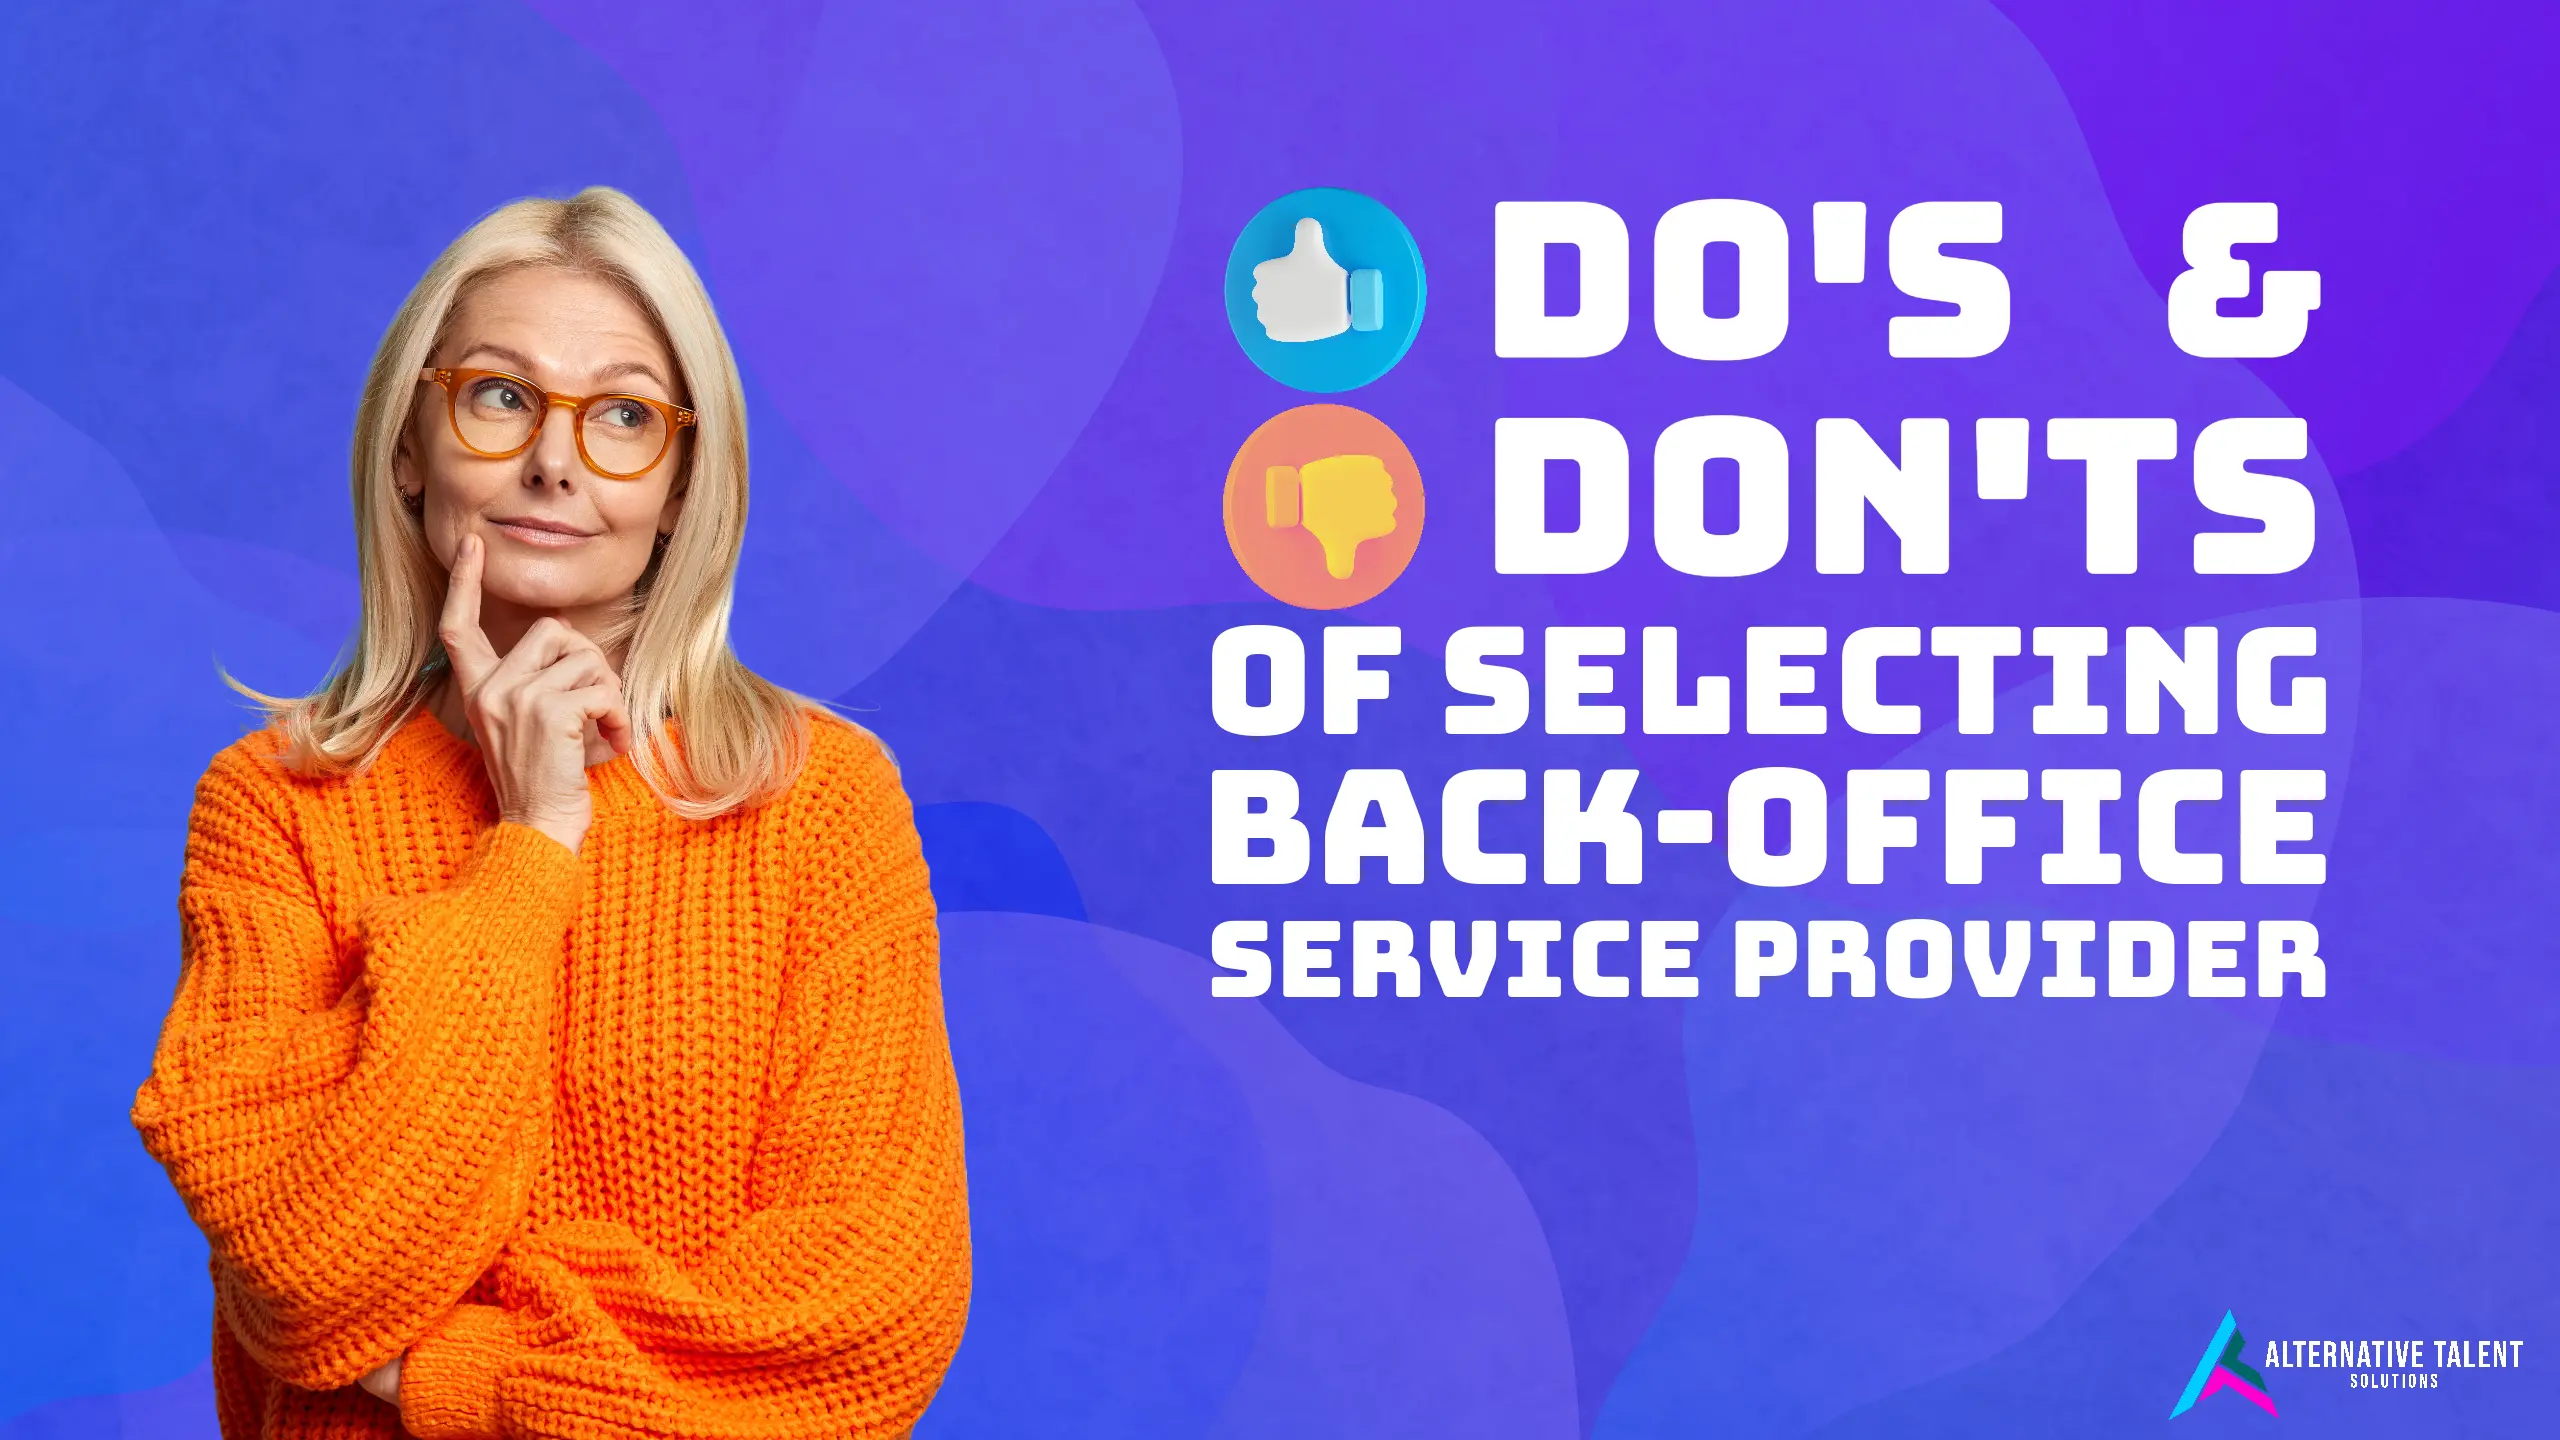 Do's and Don'ts of Selecting Back-office Service Provider